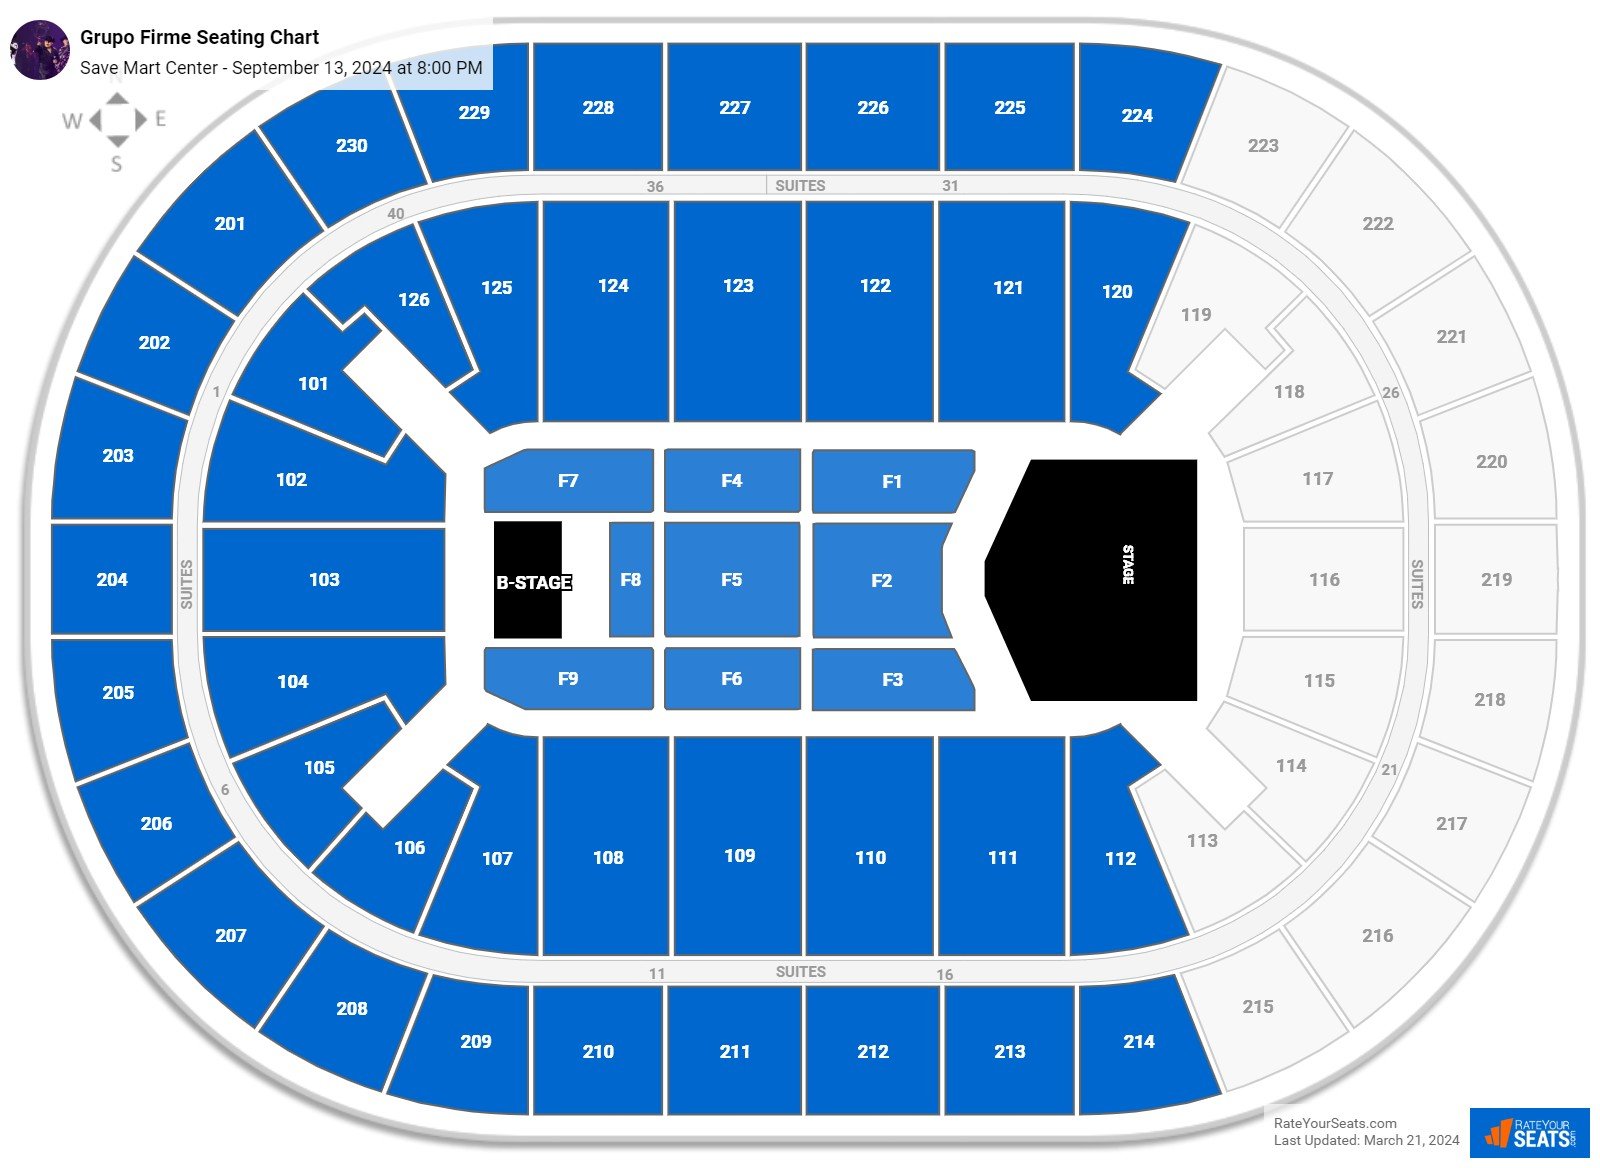 Grupo Firme seating chart Save Mart Center